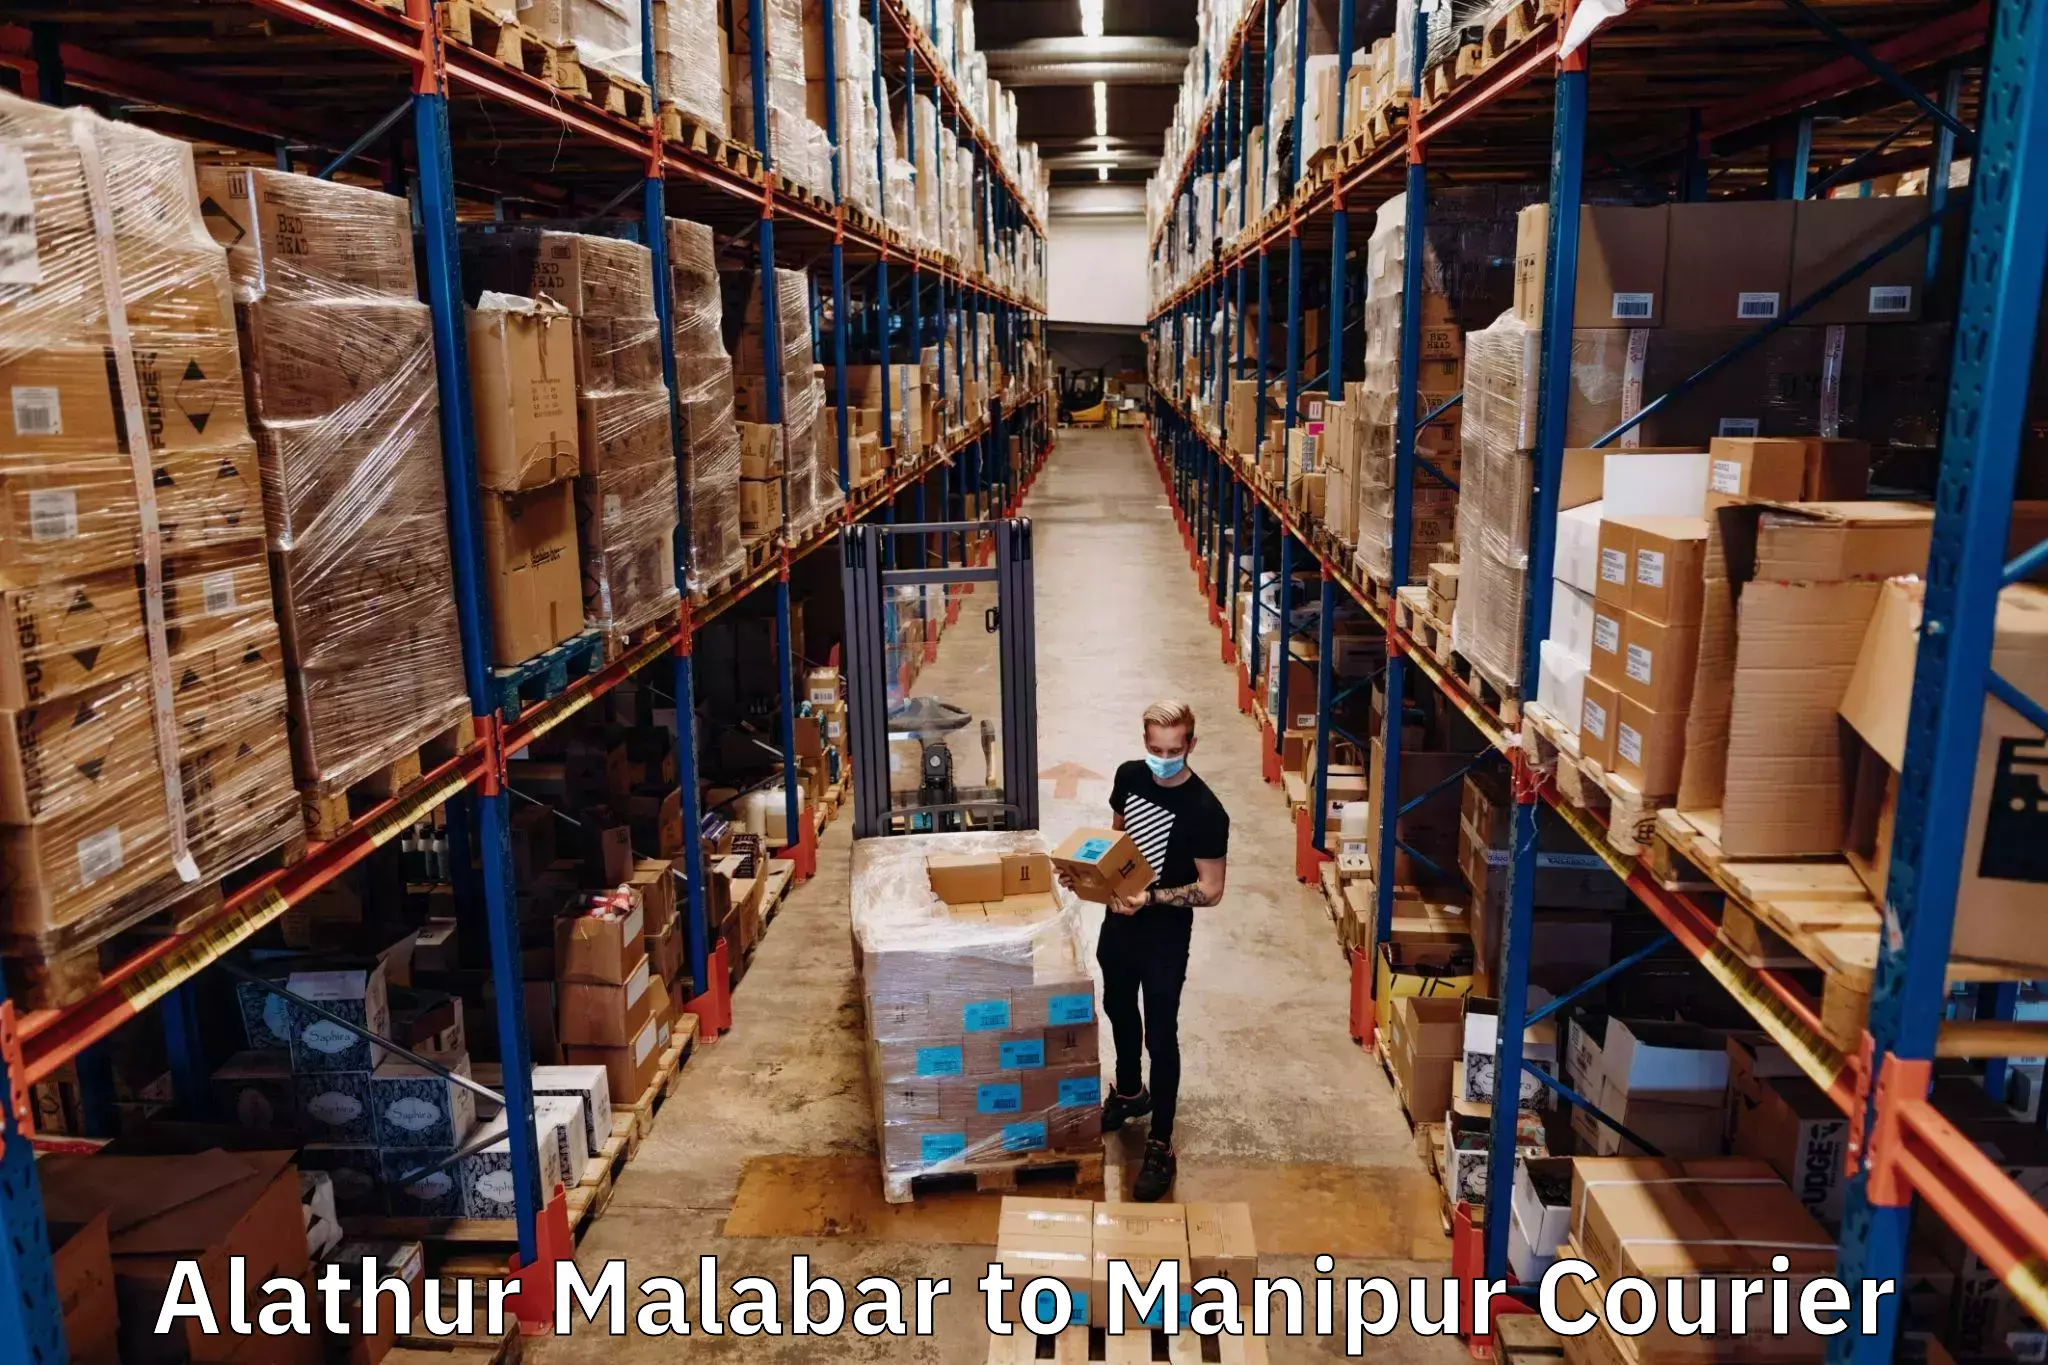 Global courier networks Alathur Malabar to Senapati